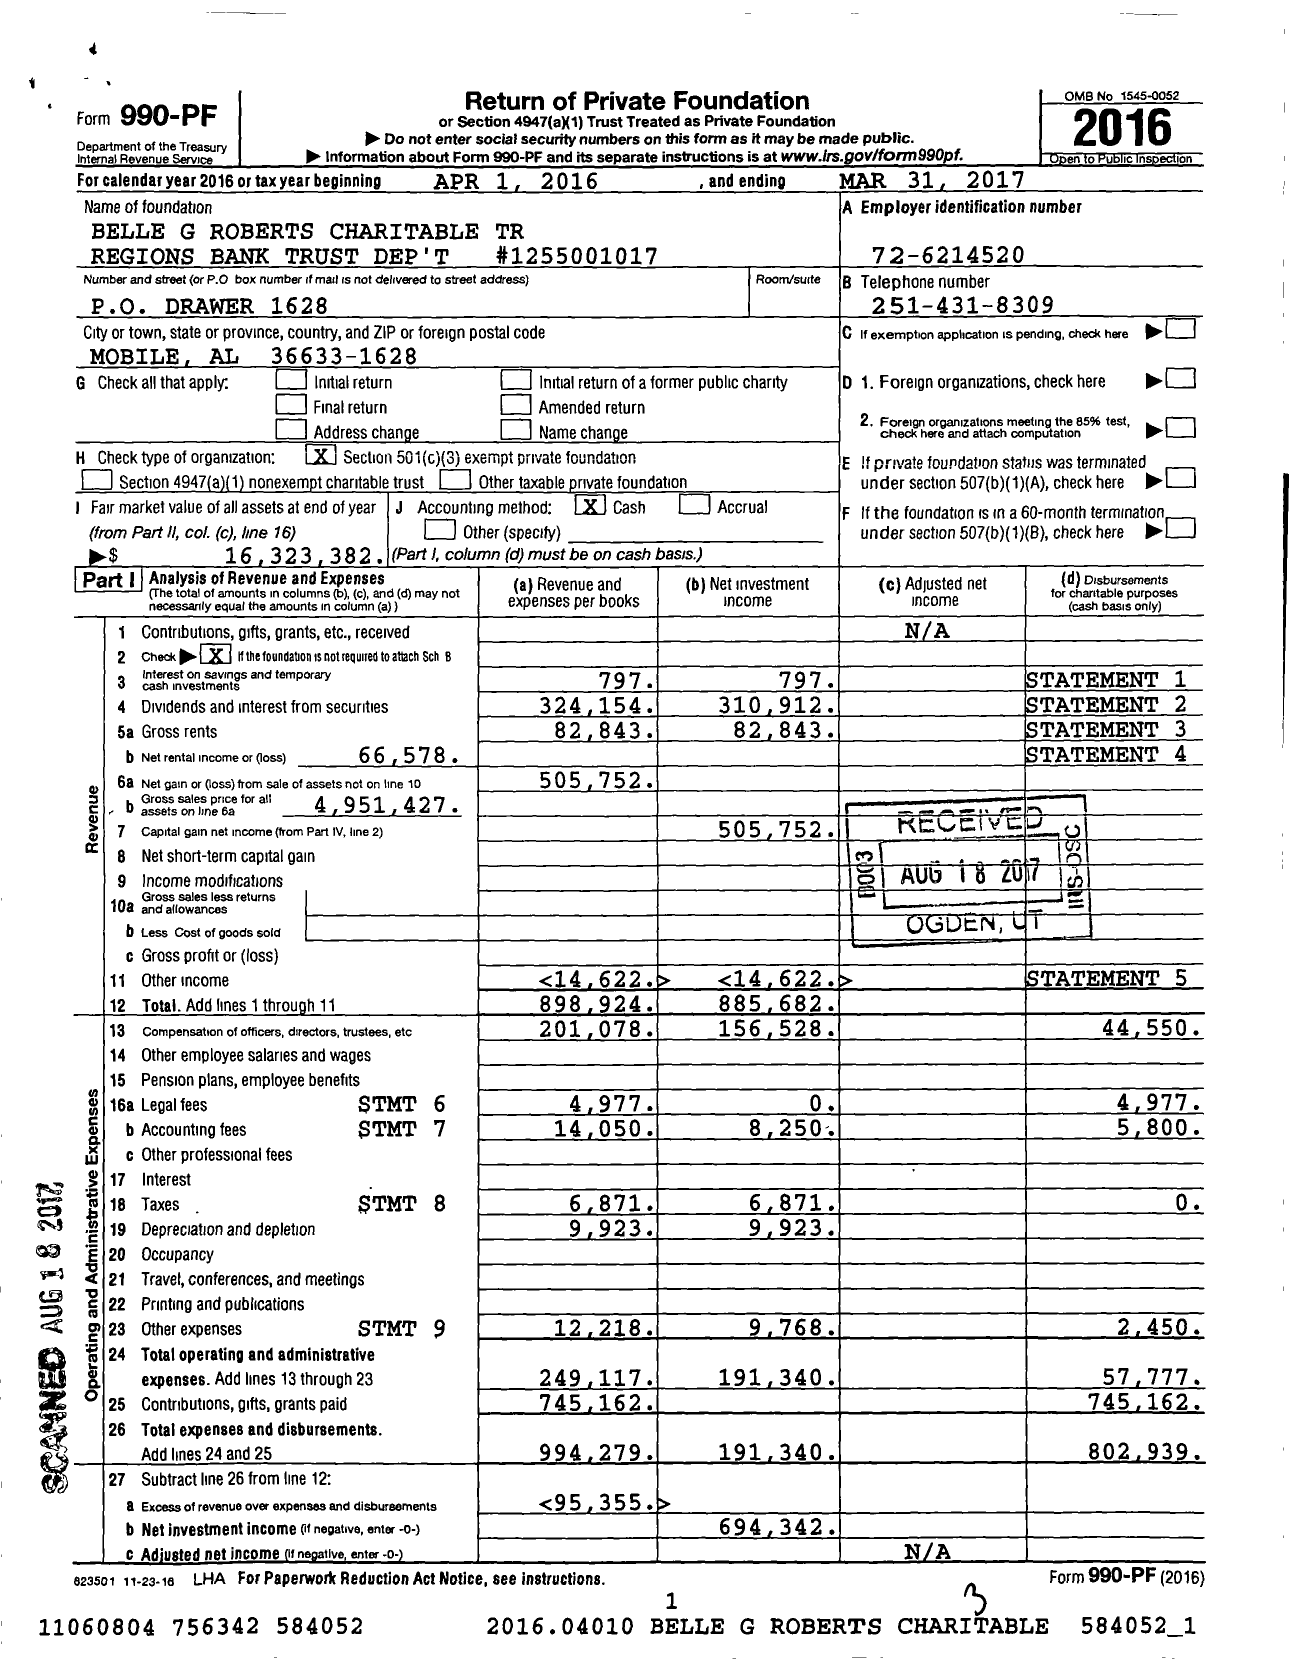 Image of first page of 2016 Form 990PF for Belle G Roberts Charitable TR Regions Bank Trust Dep't #1255001017